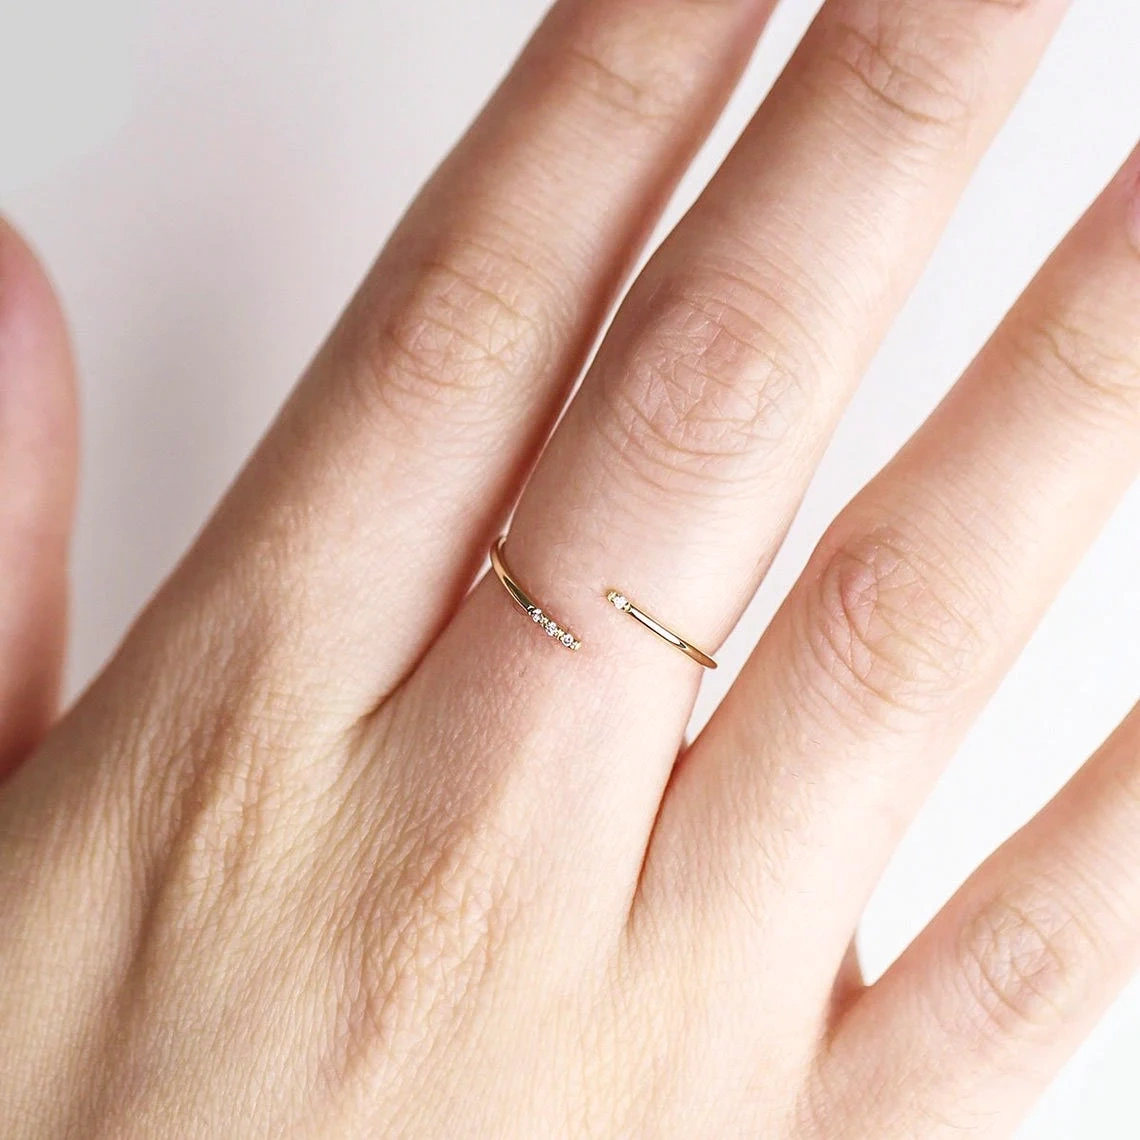 10K Solid Gold Dainty Twist Open Inset Crystal Stacking Statement Adjustable Ring Handmade Minimalist Delicate Ring Simple Unique Thin band-10 3/4 US/Uk size – V-4